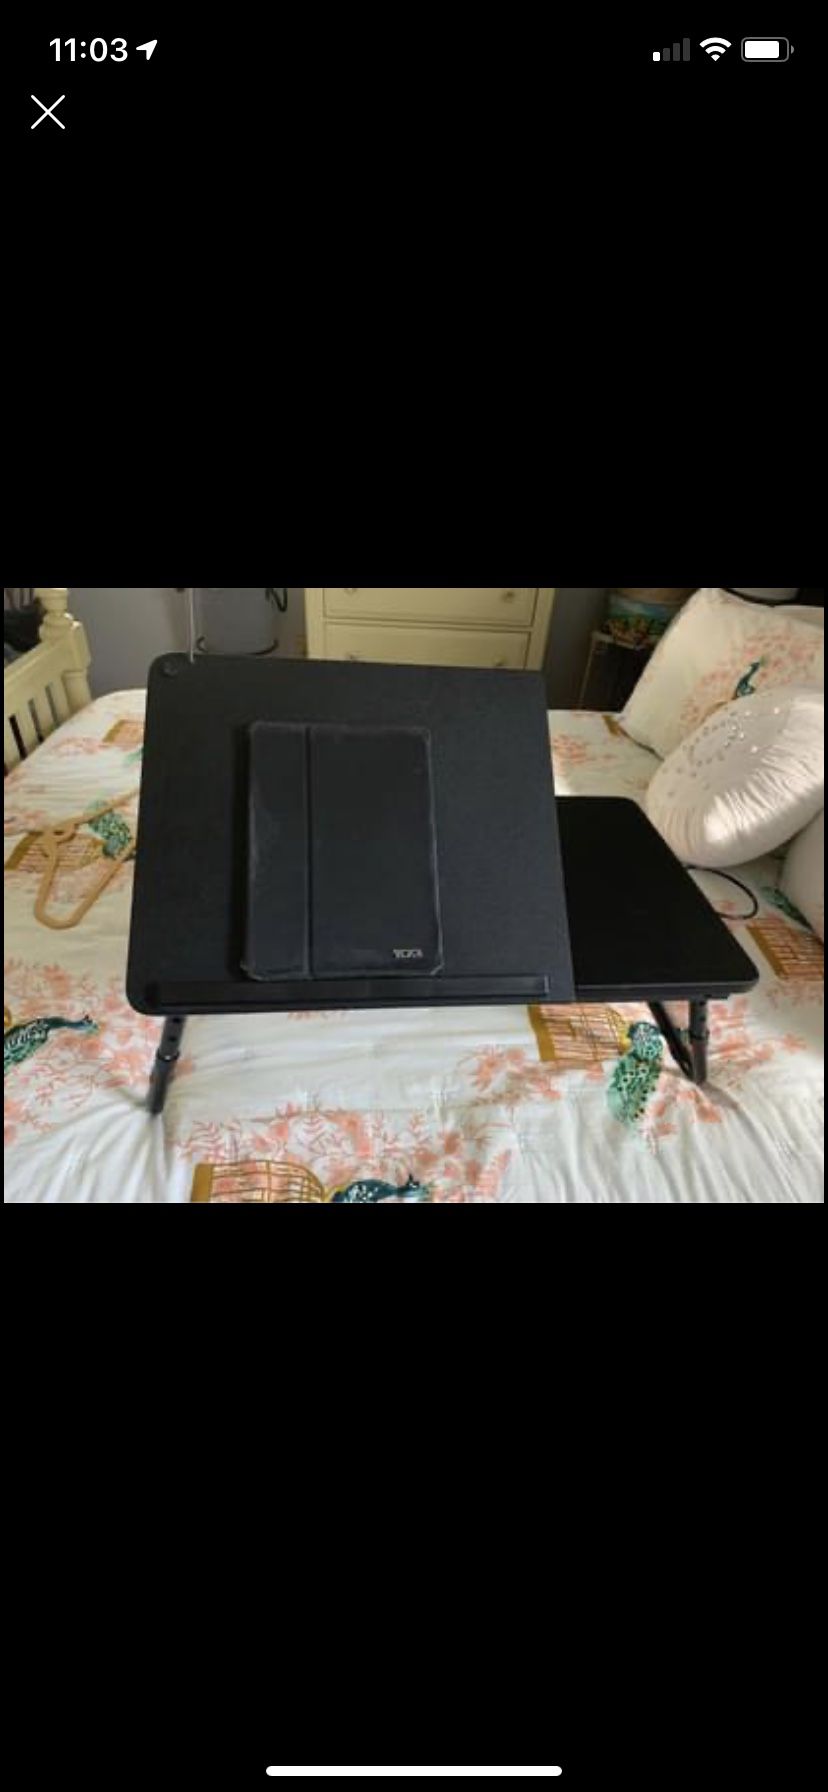 Adjustable & foldable laptop desk, bed table tray with cup holder and led light. Multiple uses: